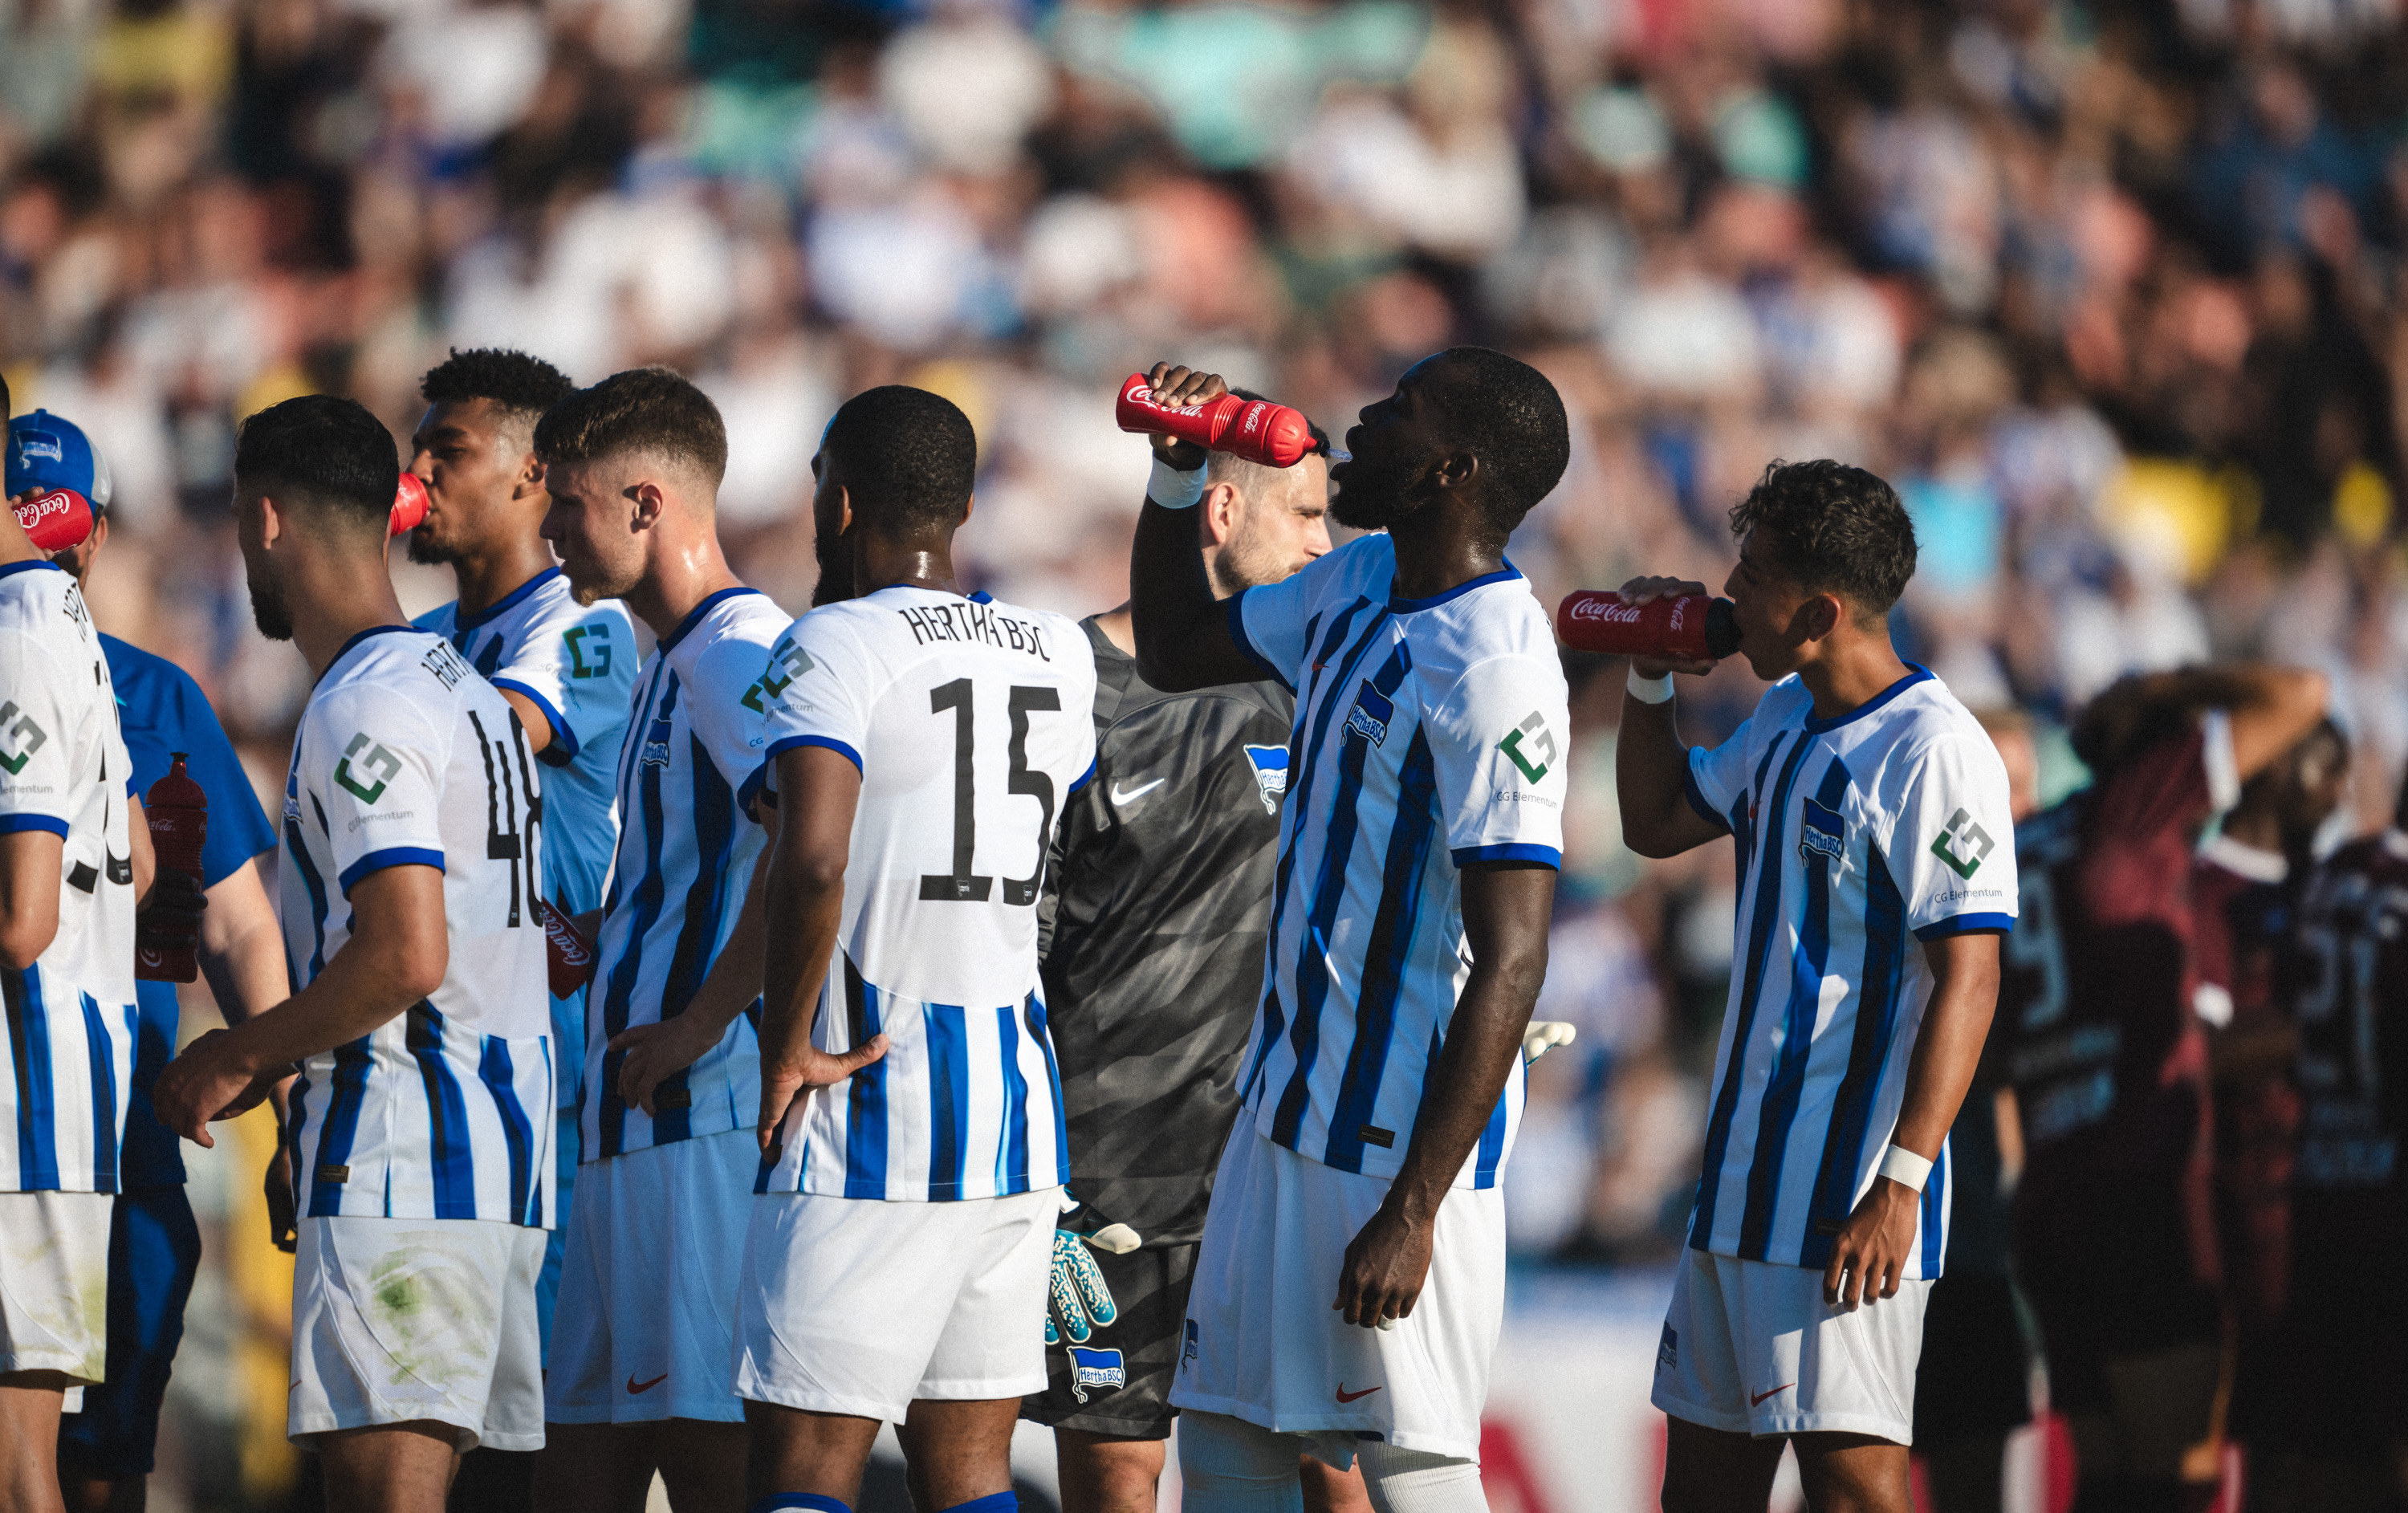 The Hertha players take a drink during the friendly against BFC Dynamo.